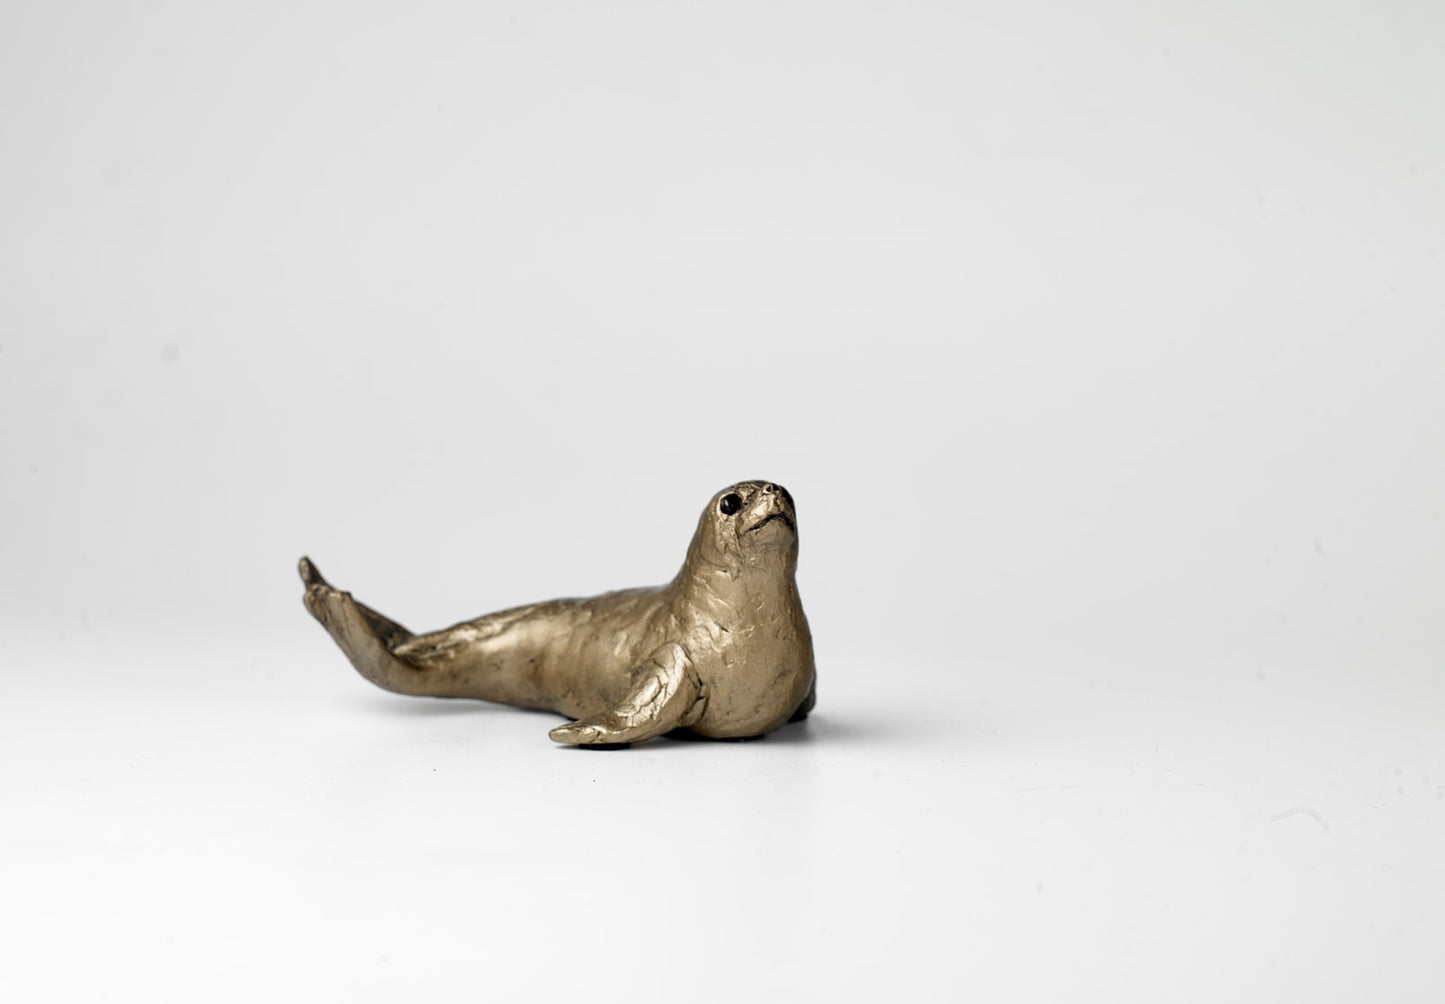 Small Seal Bronze Figurine by Jonny Sanders (Frith Sculpture)